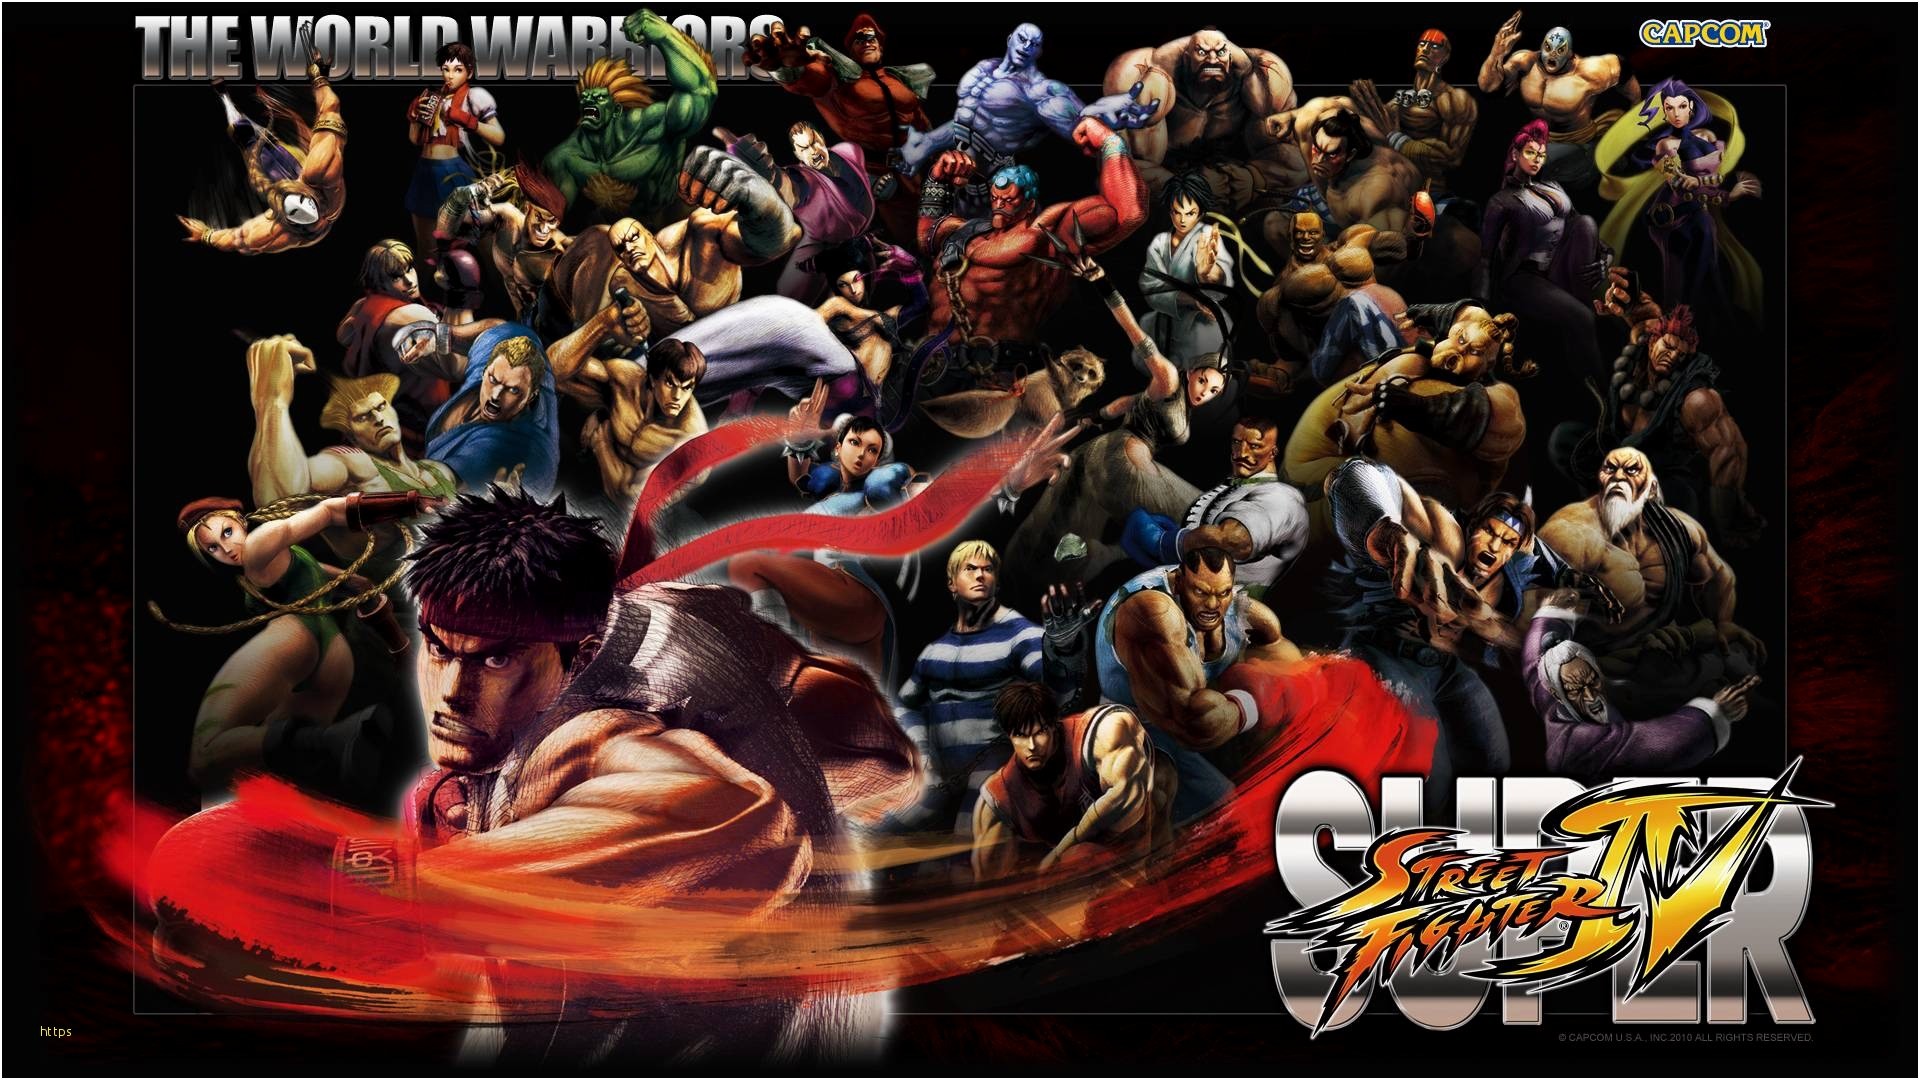 1920x1080 Street Fighter Wallpaper Awesome Street Fighter Wallpapers Hd Wallpaper Cave